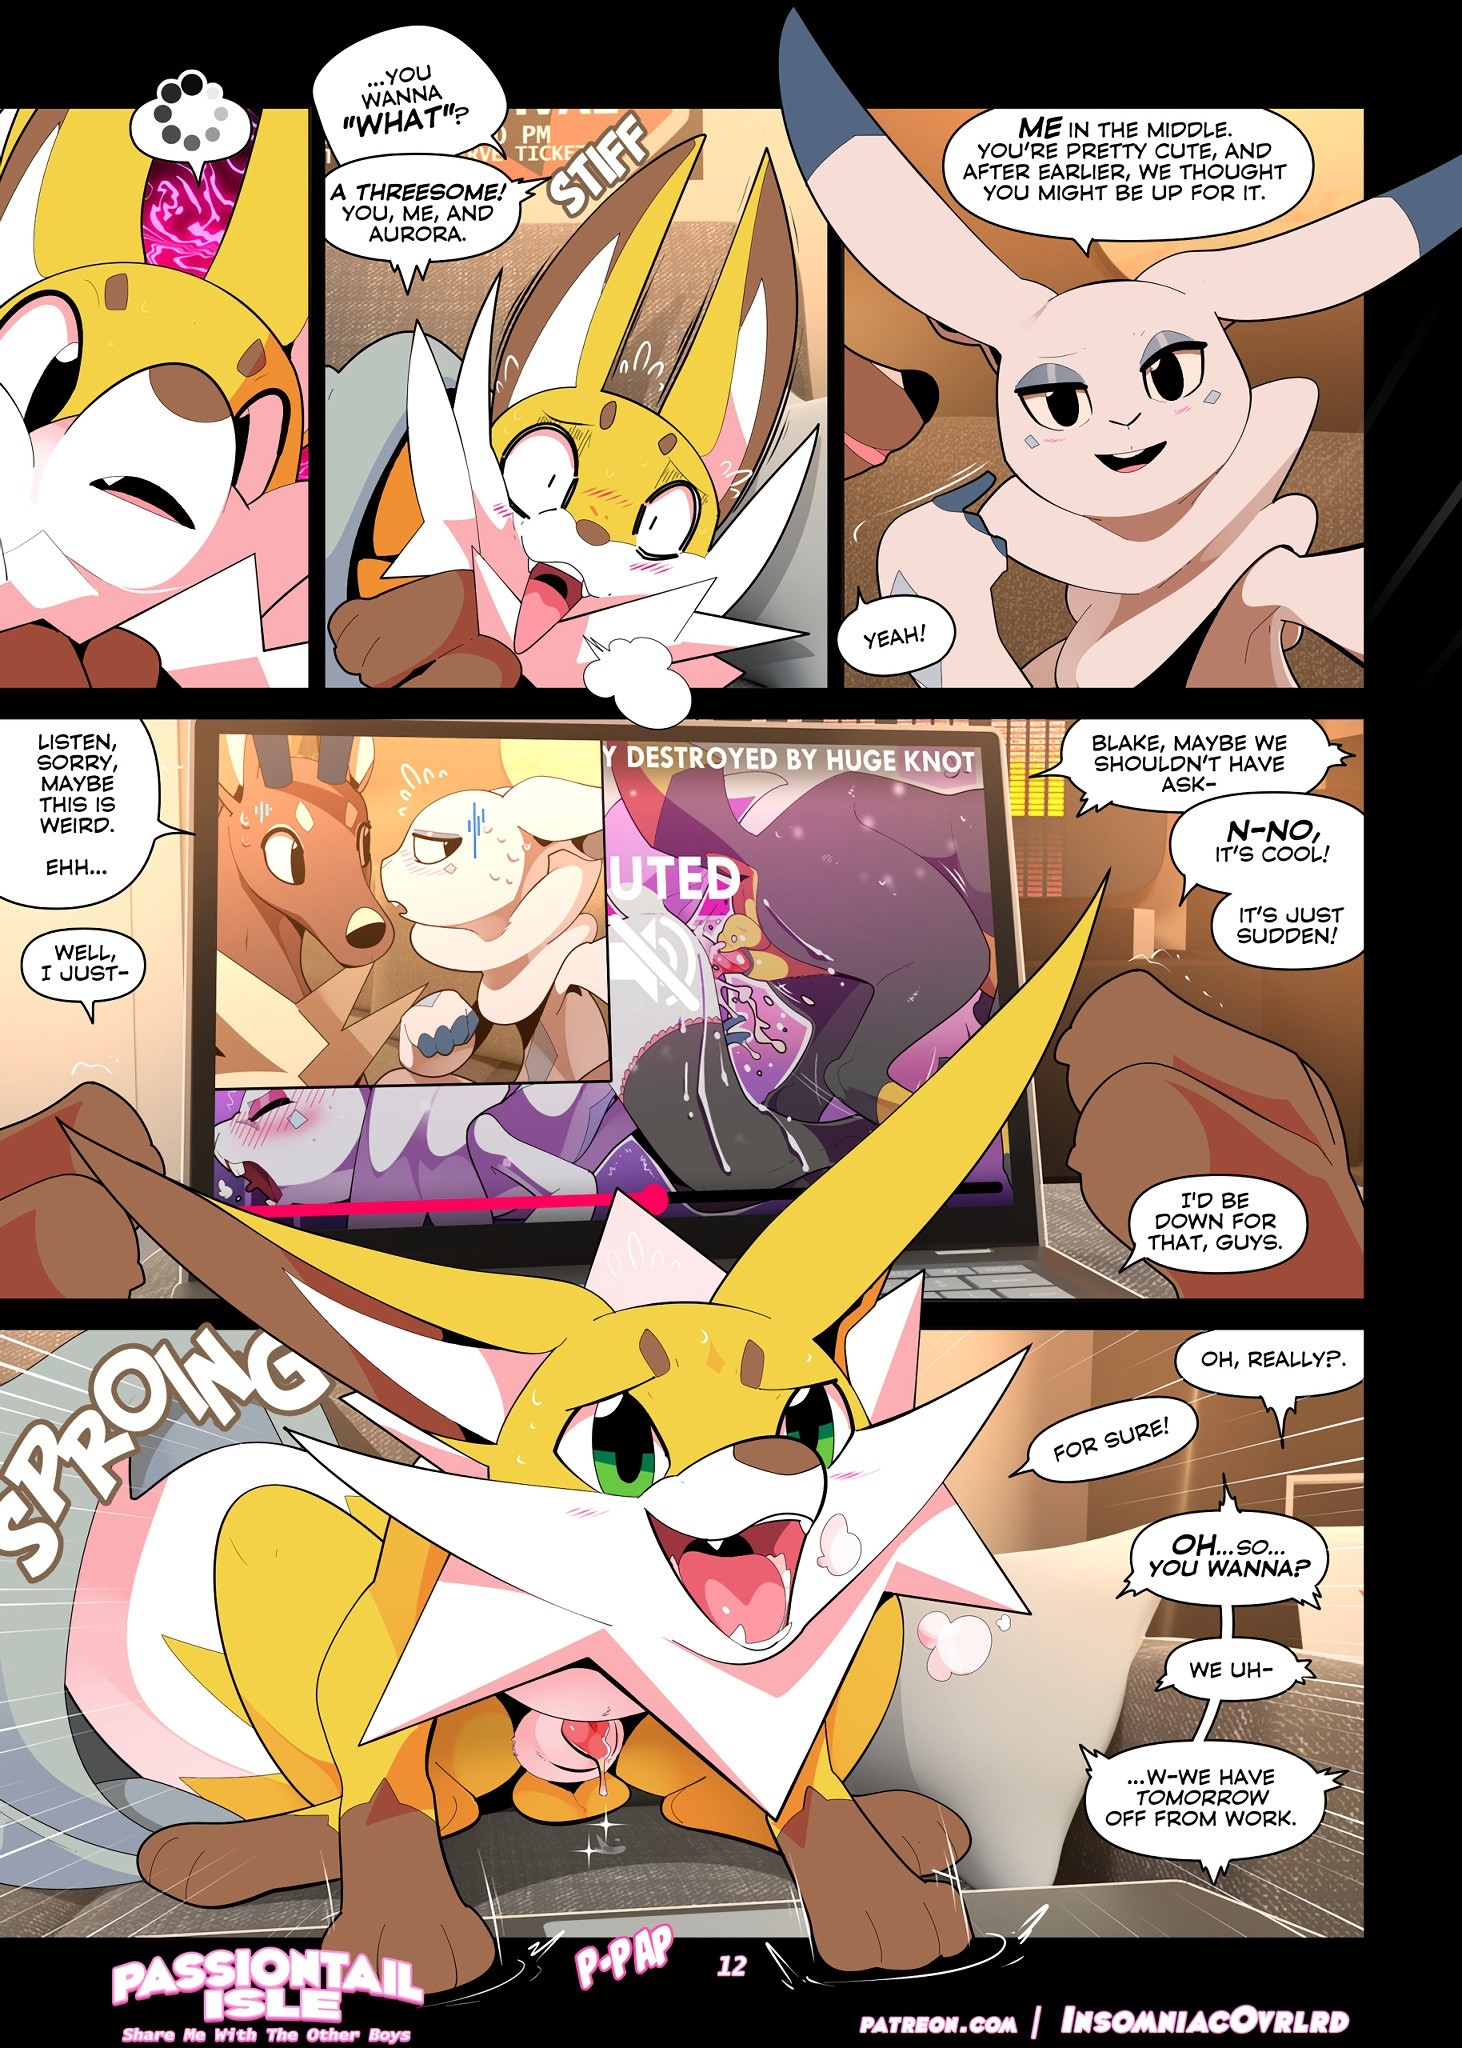 Passiontail Isle: Share Me With The Other Boys porn comic picture 13